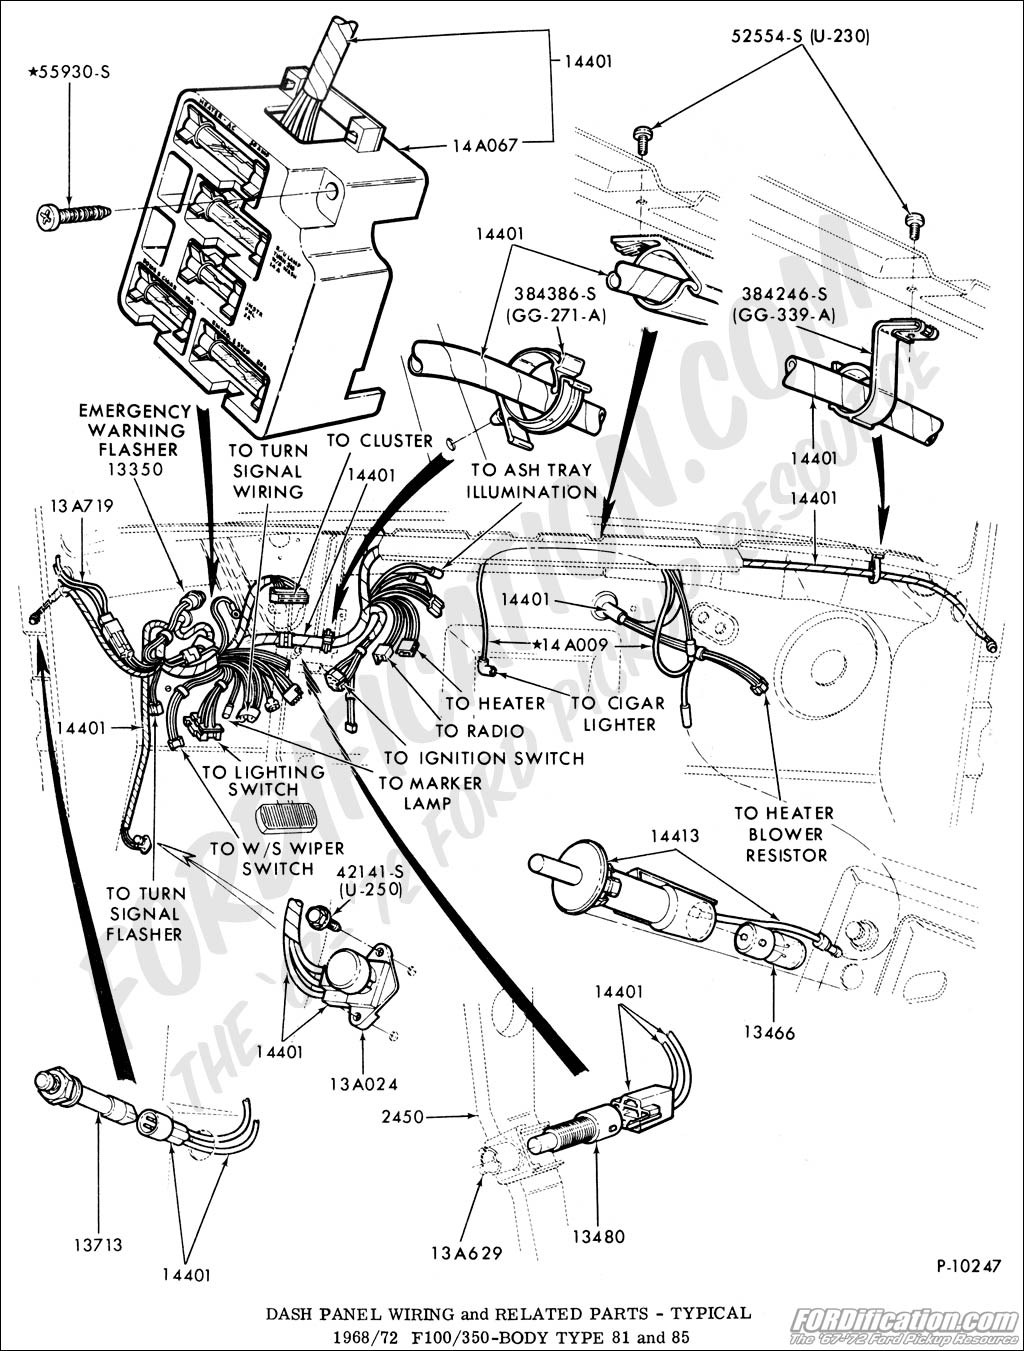 Picture of: Ford Truck Technical Drawings and Schematics – Section I